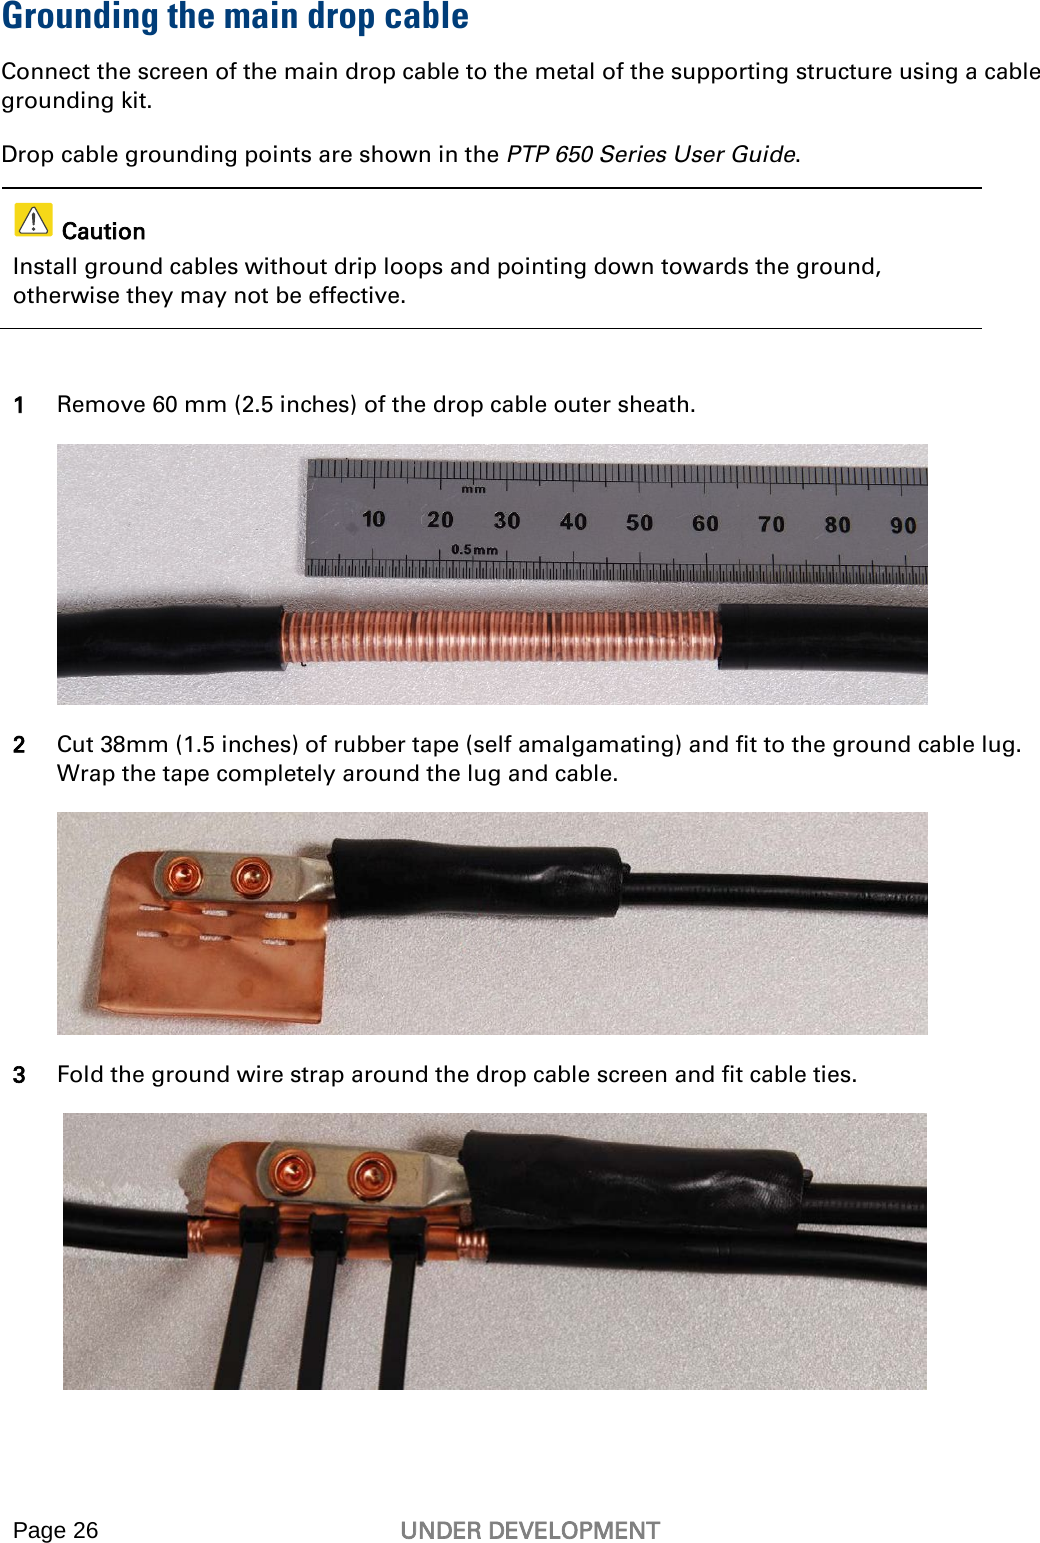  Page 26 UNDER DEVELOPMENT    Grounding the main drop cable Connect the screen of the main drop cable to the metal of the supporting structure using a cable grounding kit. Drop cable grounding points are shown in the PTP 650 Series User Guide.   Caution Install ground cables without drip loops and pointing down towards the ground, otherwise they may not be effective.  1 Remove 60 mm (2.5 inches) of the drop cable outer sheath.  2 Cut 38mm (1.5 inches) of rubber tape (self amalgamating) and fit to the ground cable lug. Wrap the tape completely around the lug and cable.  3 Fold the ground wire strap around the drop cable screen and fit cable ties.   